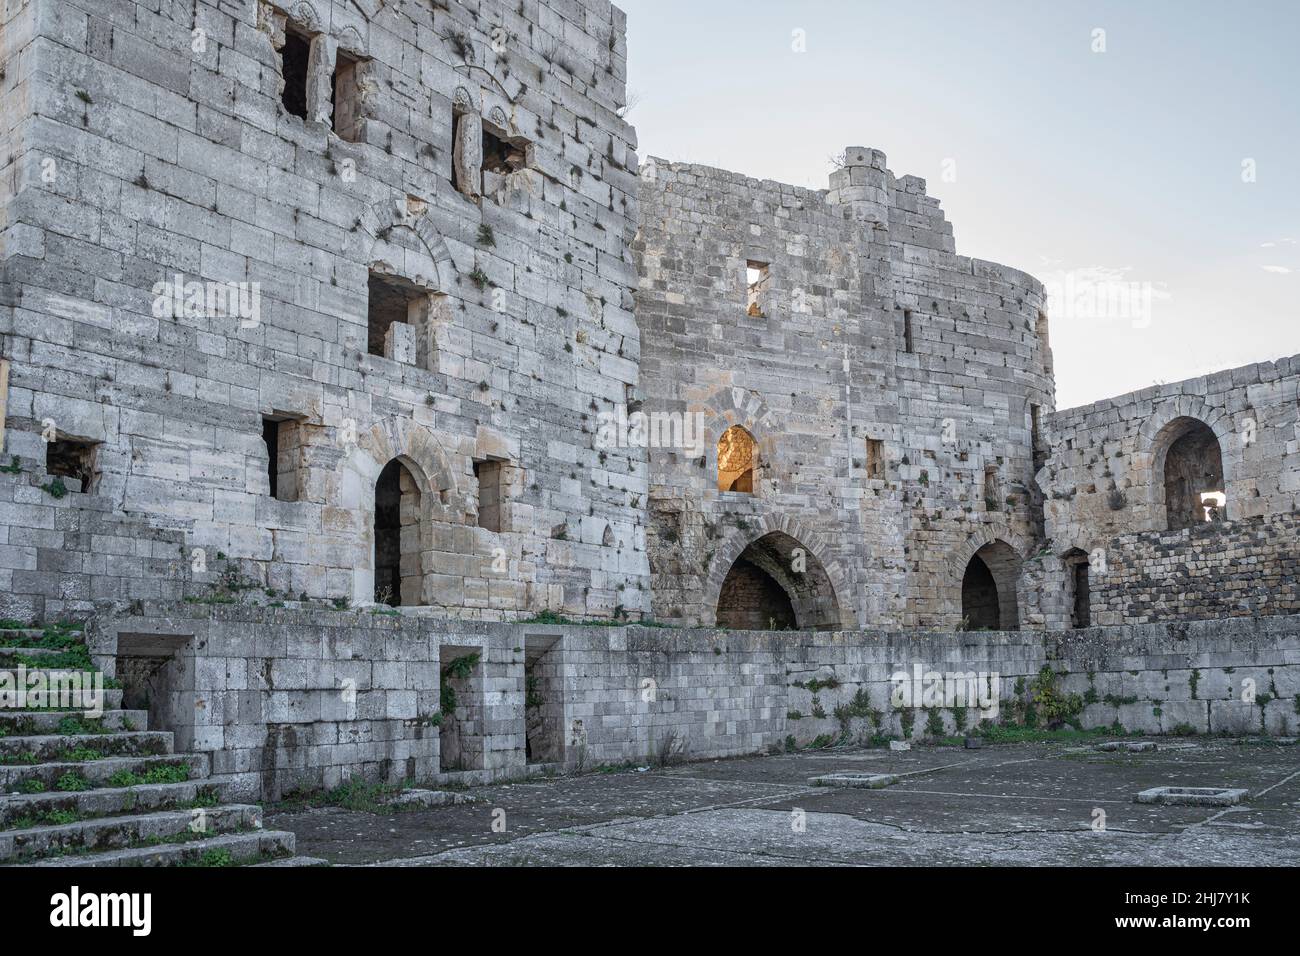 Crac des Chevaliers – A crusader castle caught in conflict zone, Syria Stock Photo